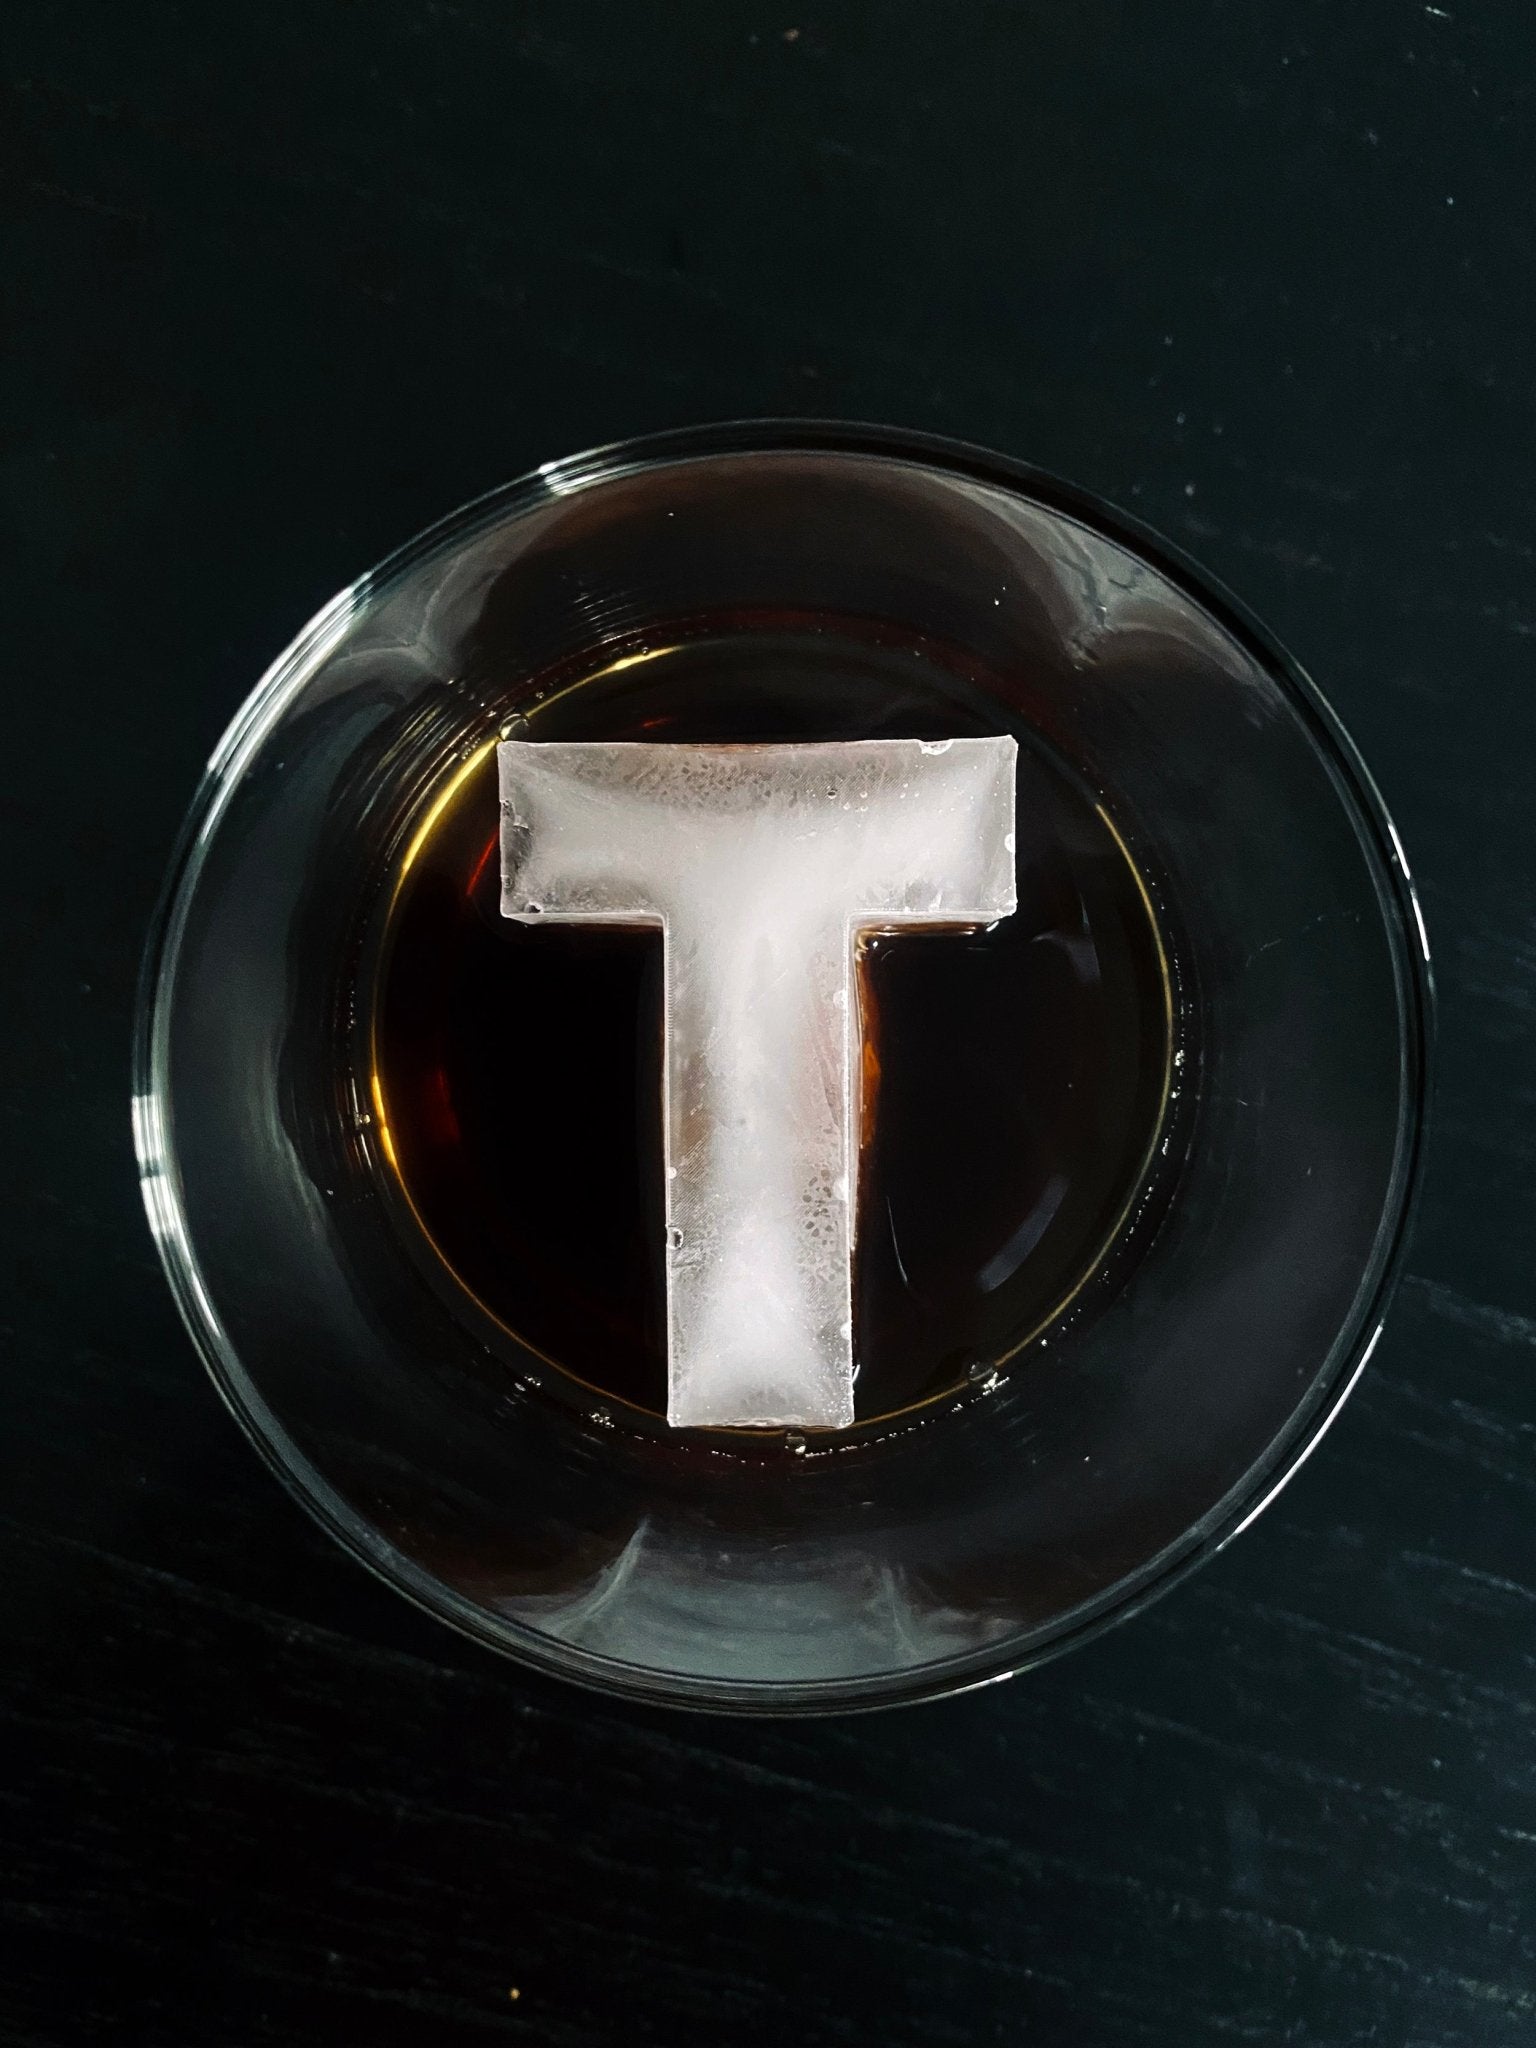 Letter Shaped Ice Molds (Block Font)